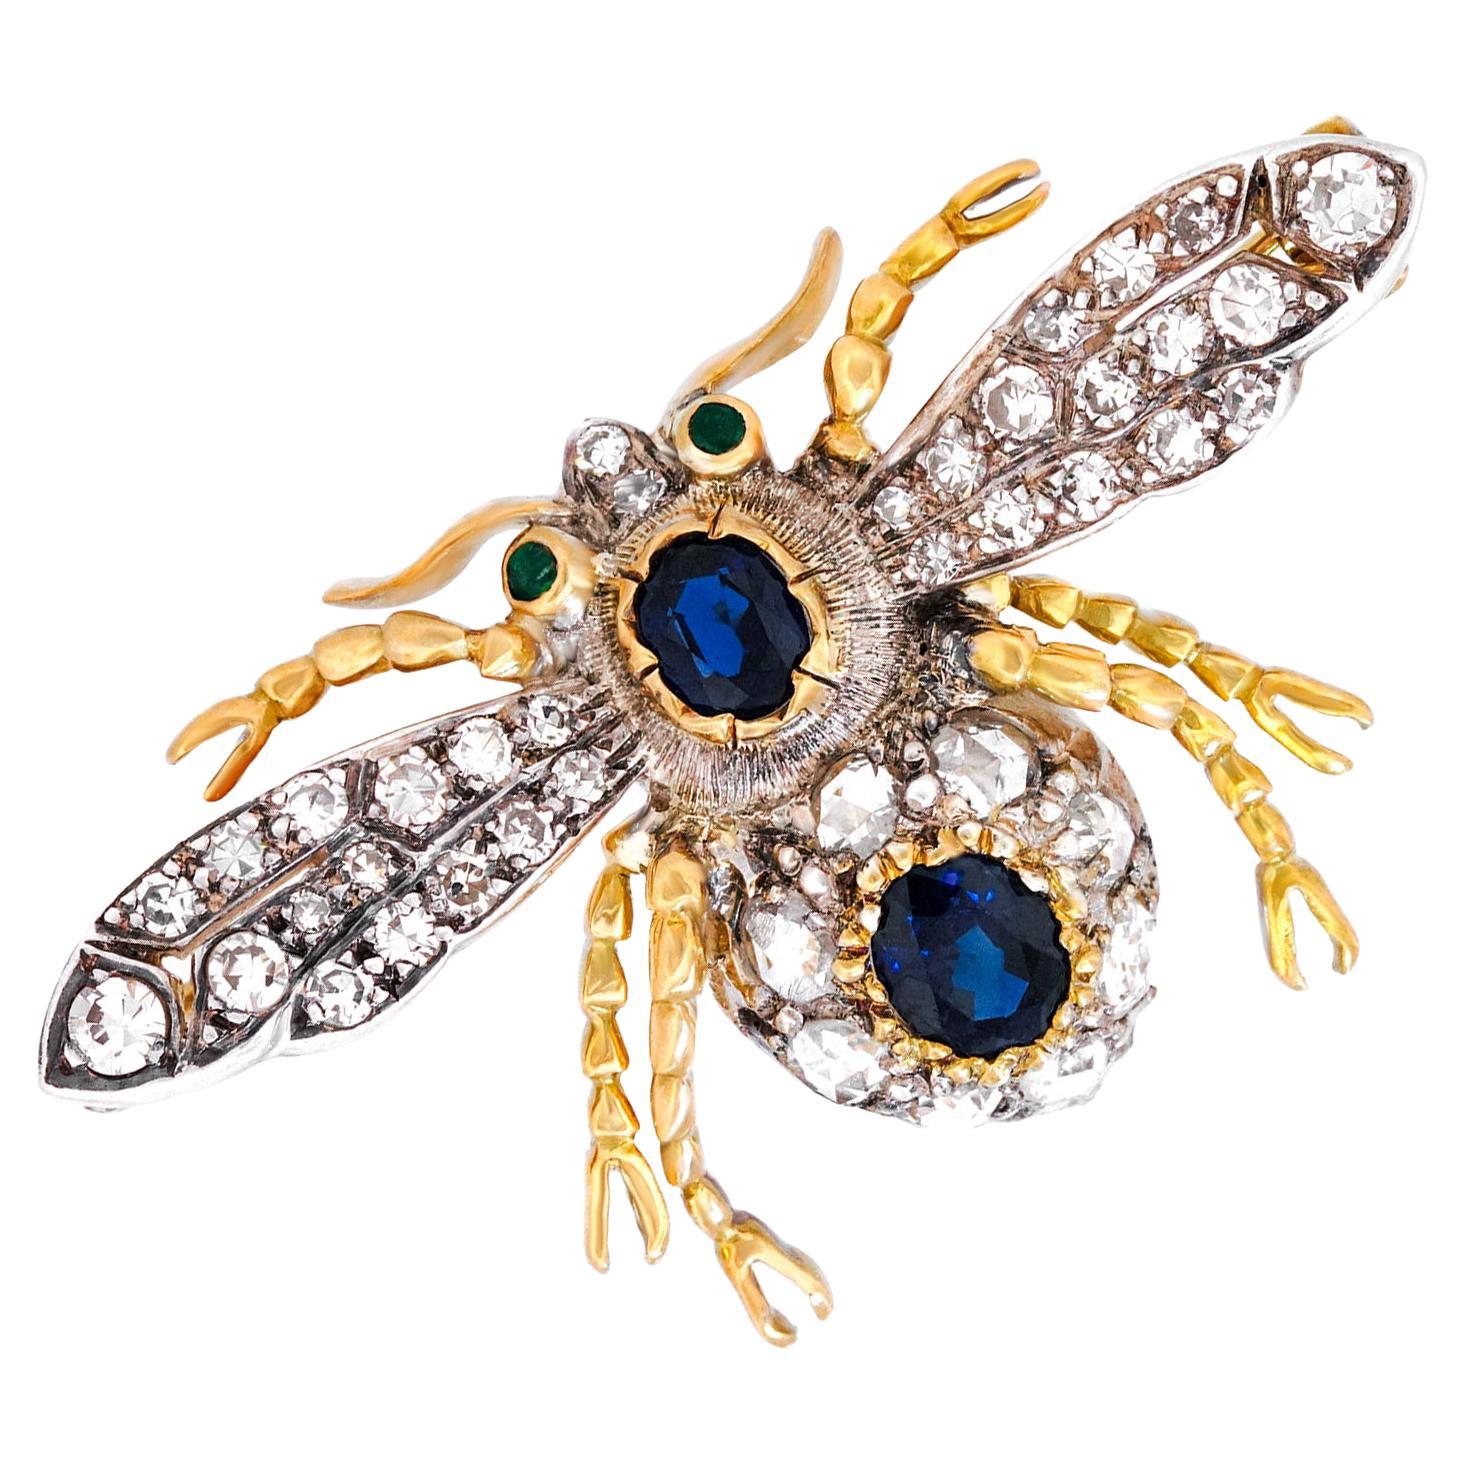 Antique Diamond and Sapphire Bee Brooch